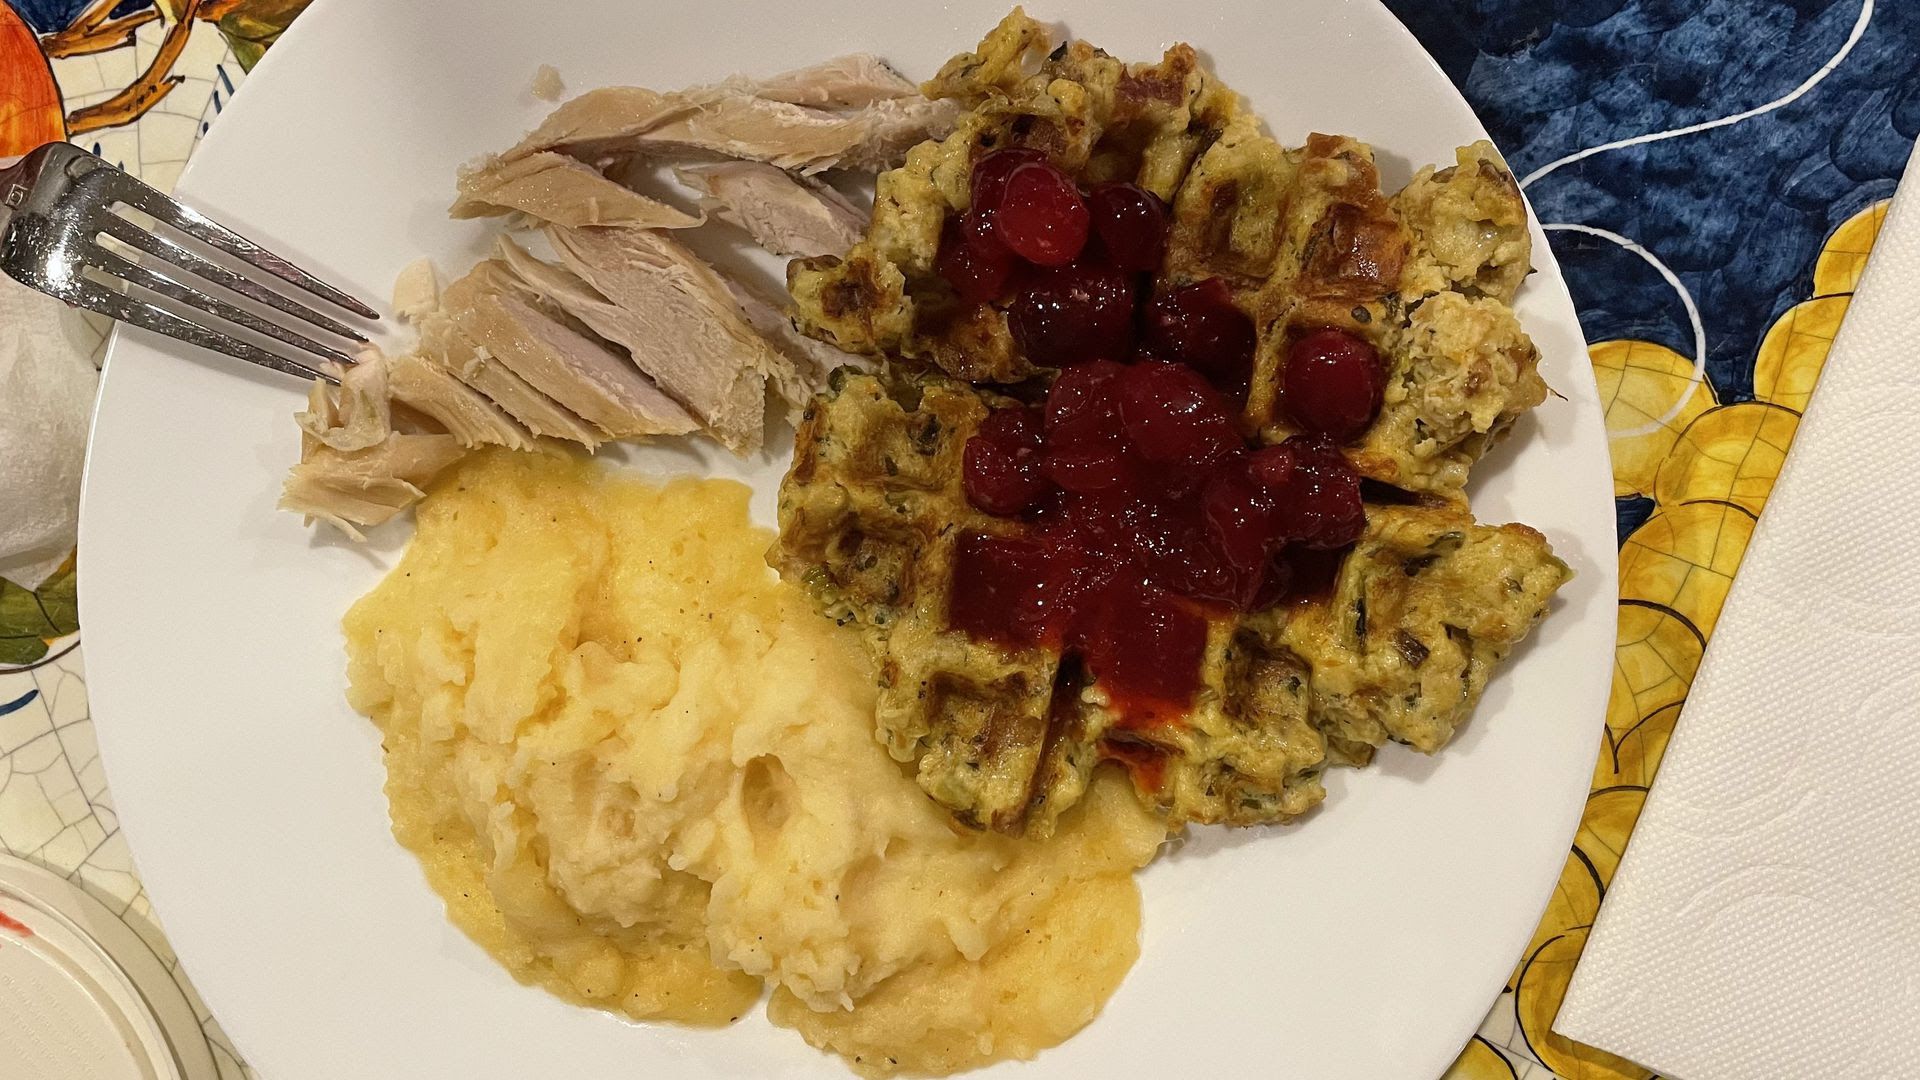 All hail The Stuffle, a waffle made out of stuffing and other Thanksgiving leftovers. 